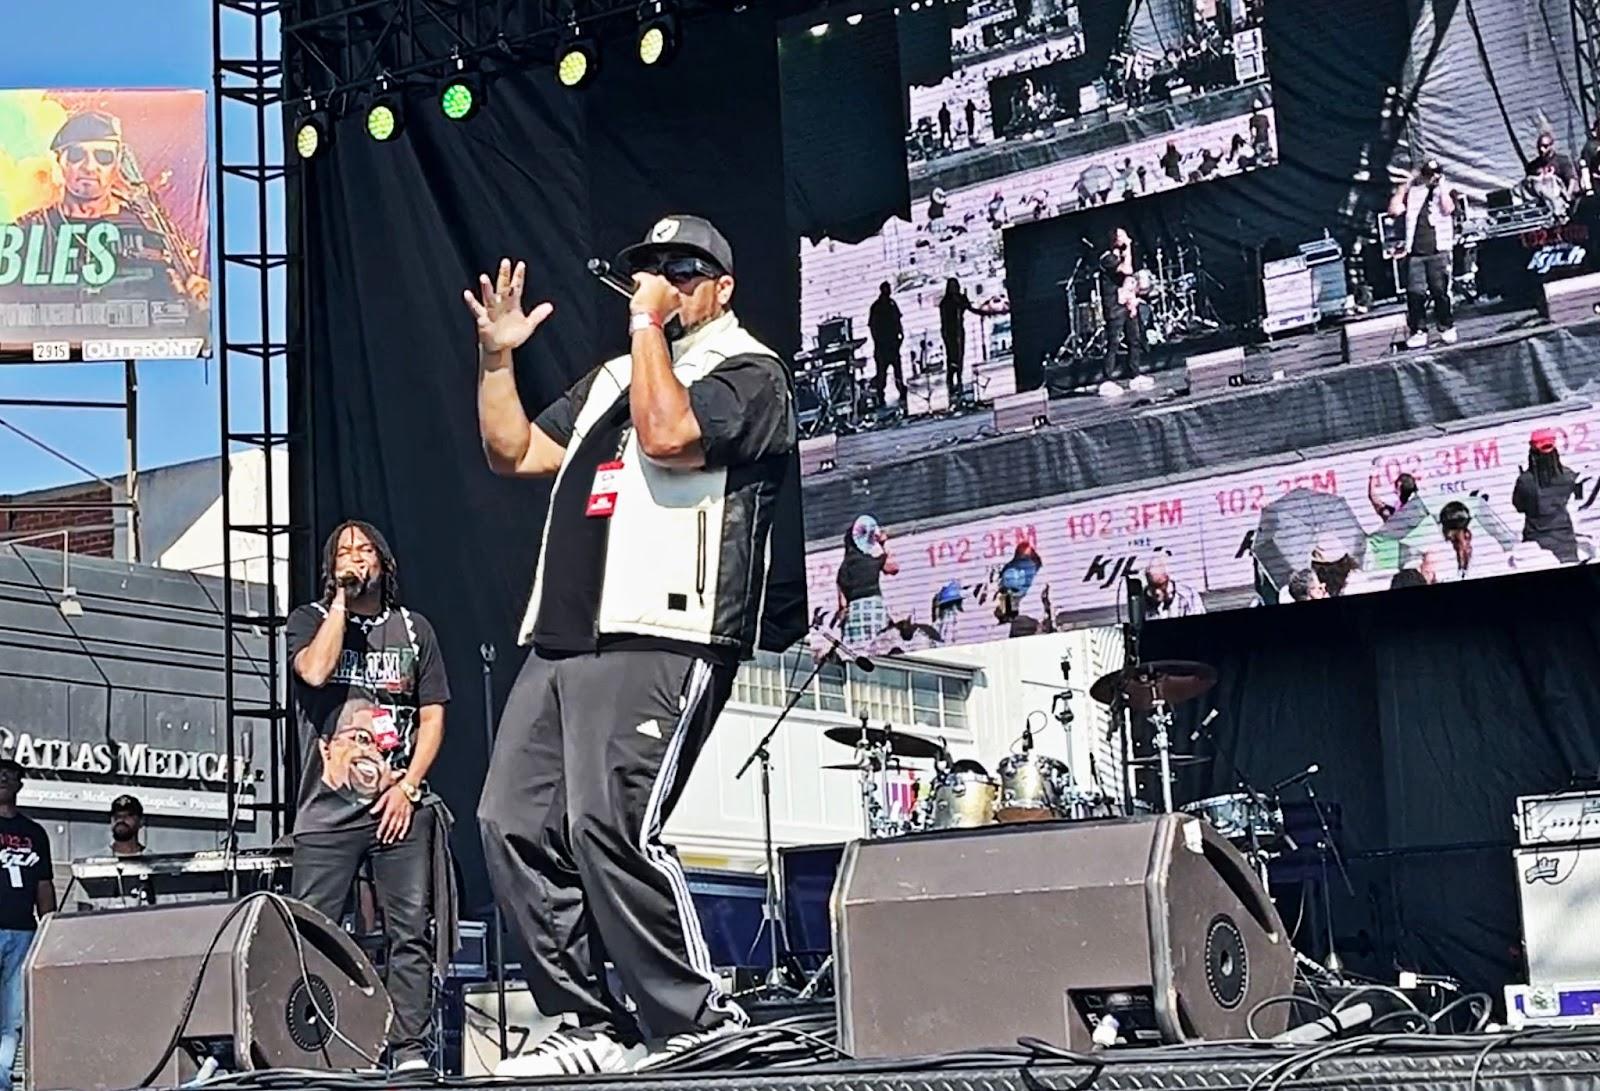 Emcee N.I.C.E. and Canton Jones Ignite Taste of Soul L.A.’s Record-Breaking Block Party over 500,000 attendees with an Electrifying Performance